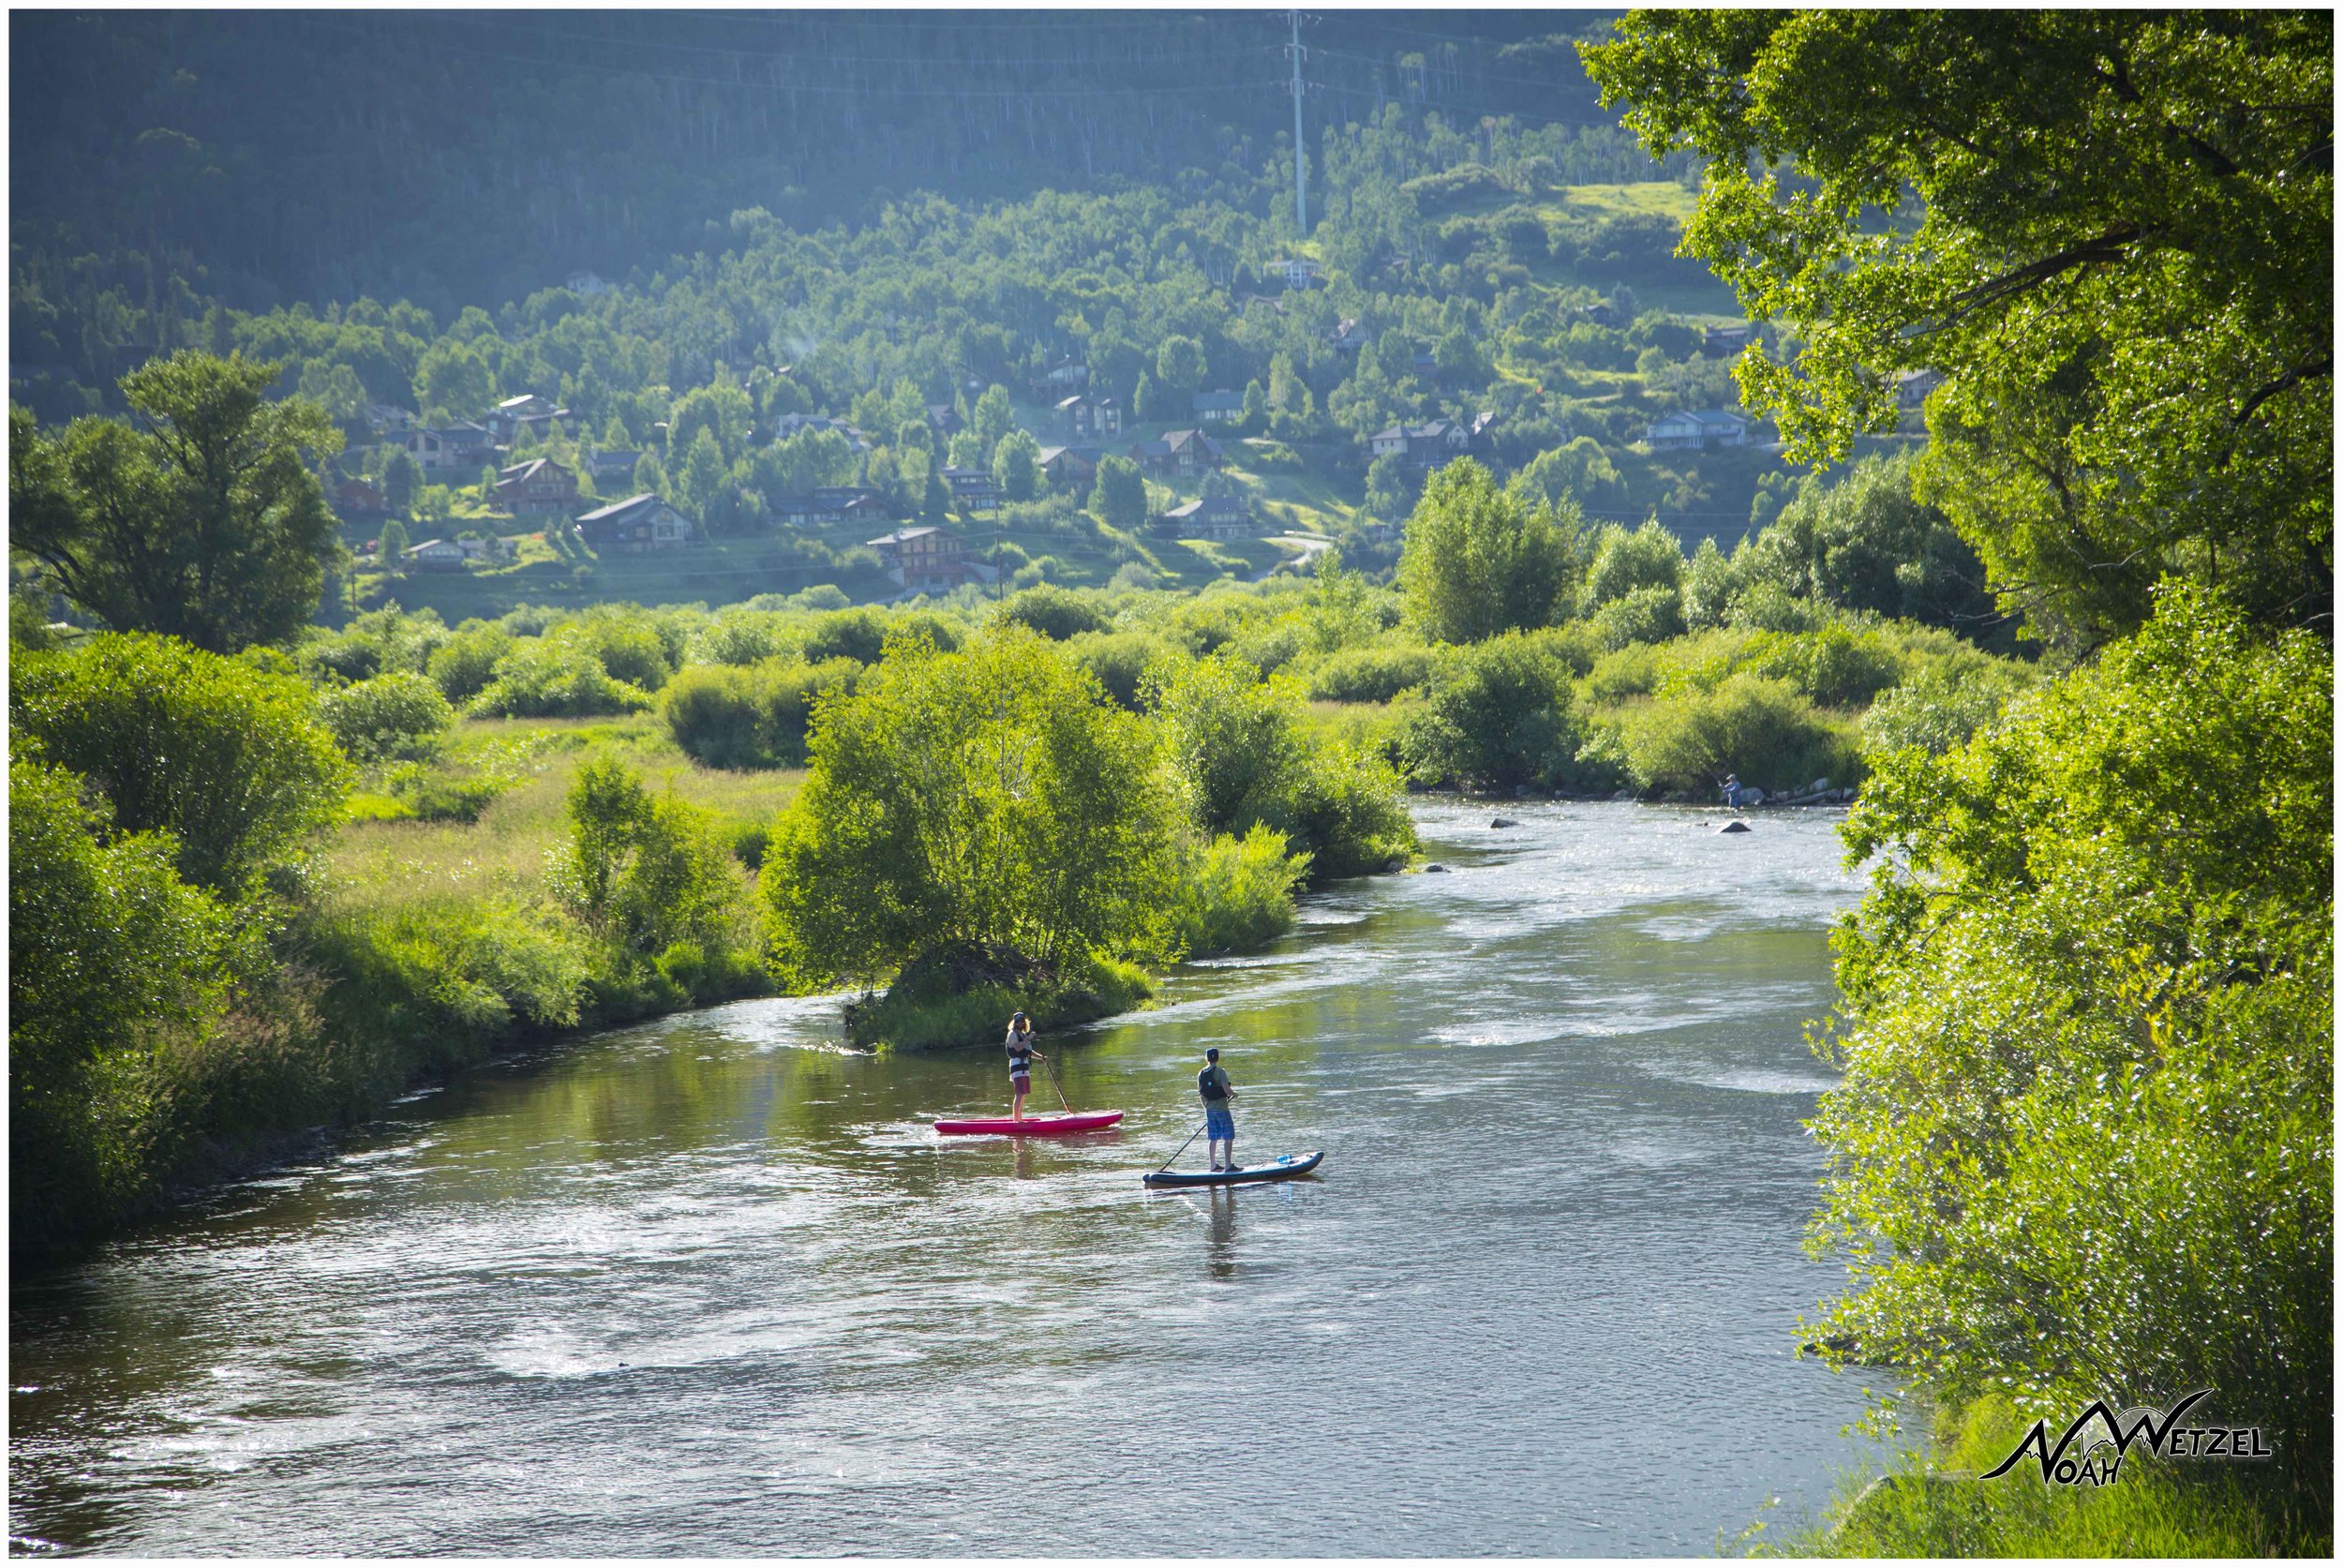 Mike Rundle and Marty Smith paddle-boarding the Yampa River. Colorado